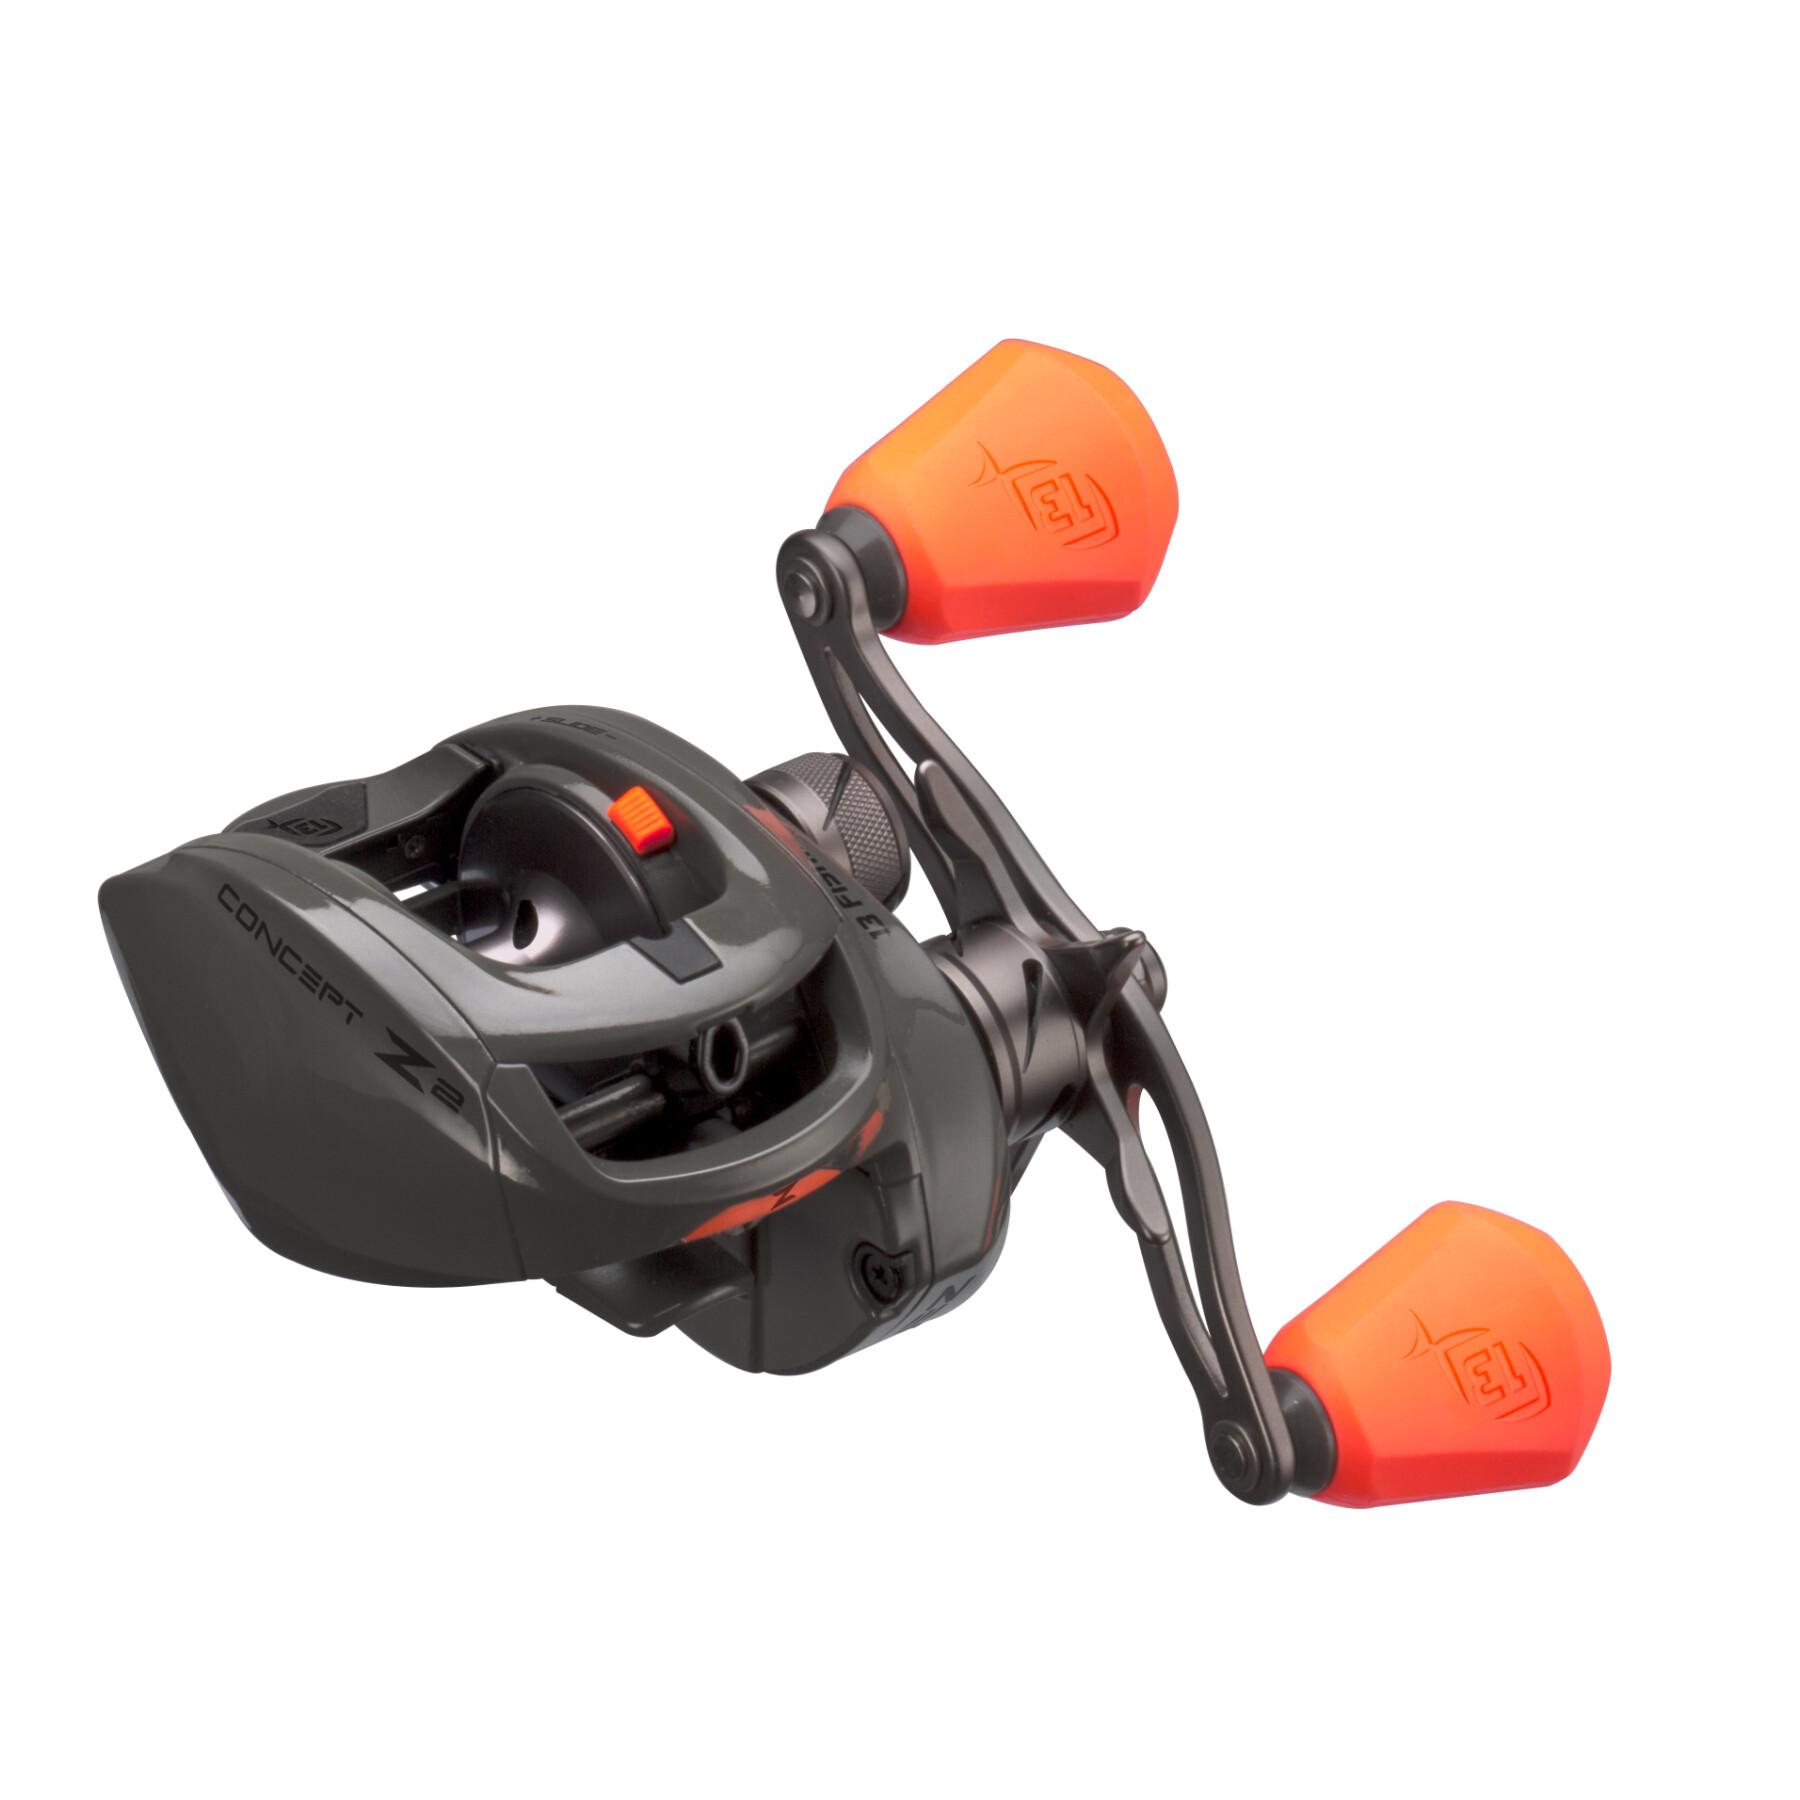 Rulle 13 Fishing Concept Z sld 7.5:1 rh